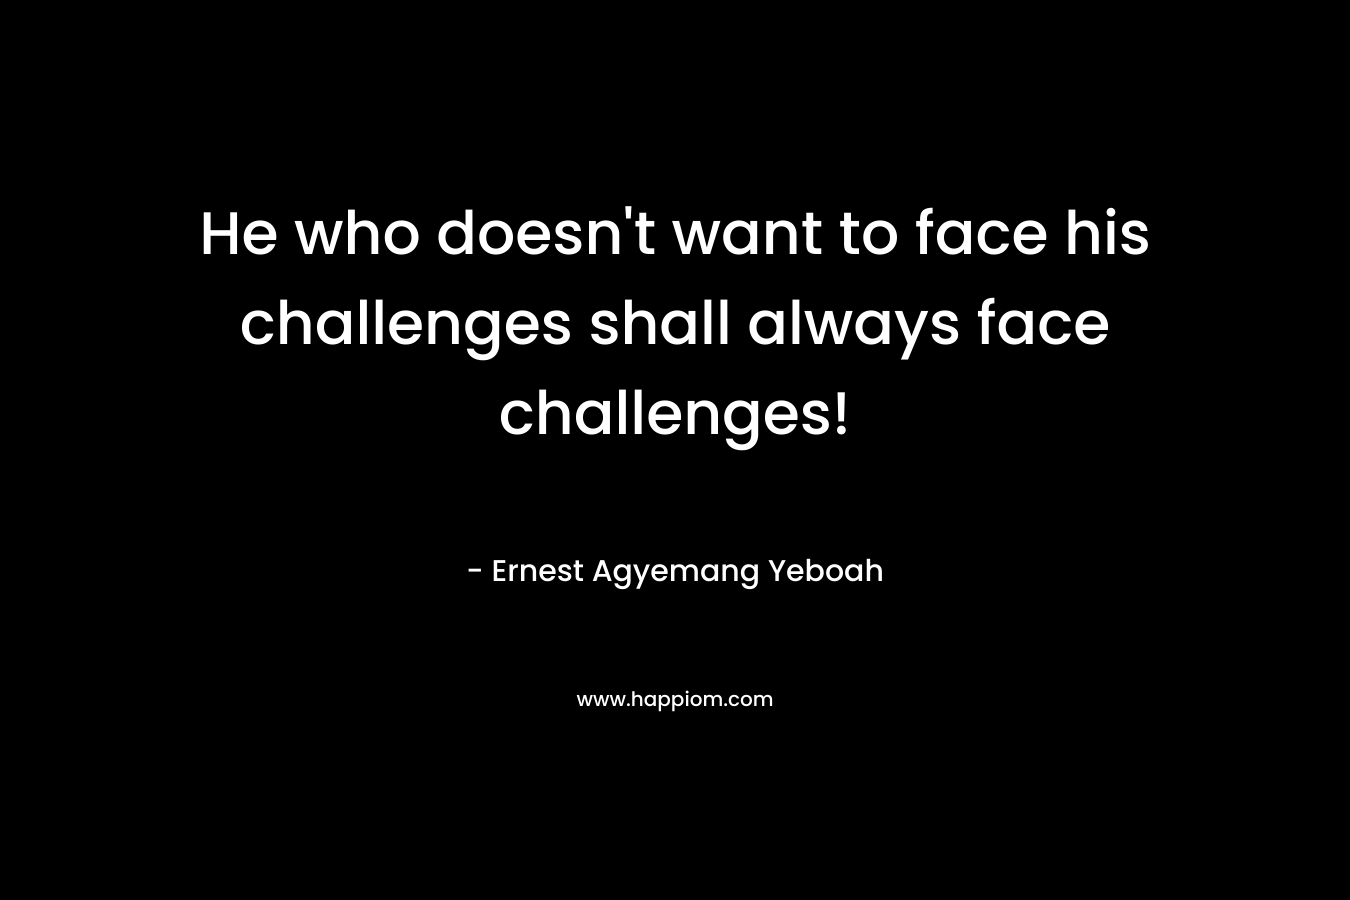 He who doesn't want to face his challenges shall always face challenges!